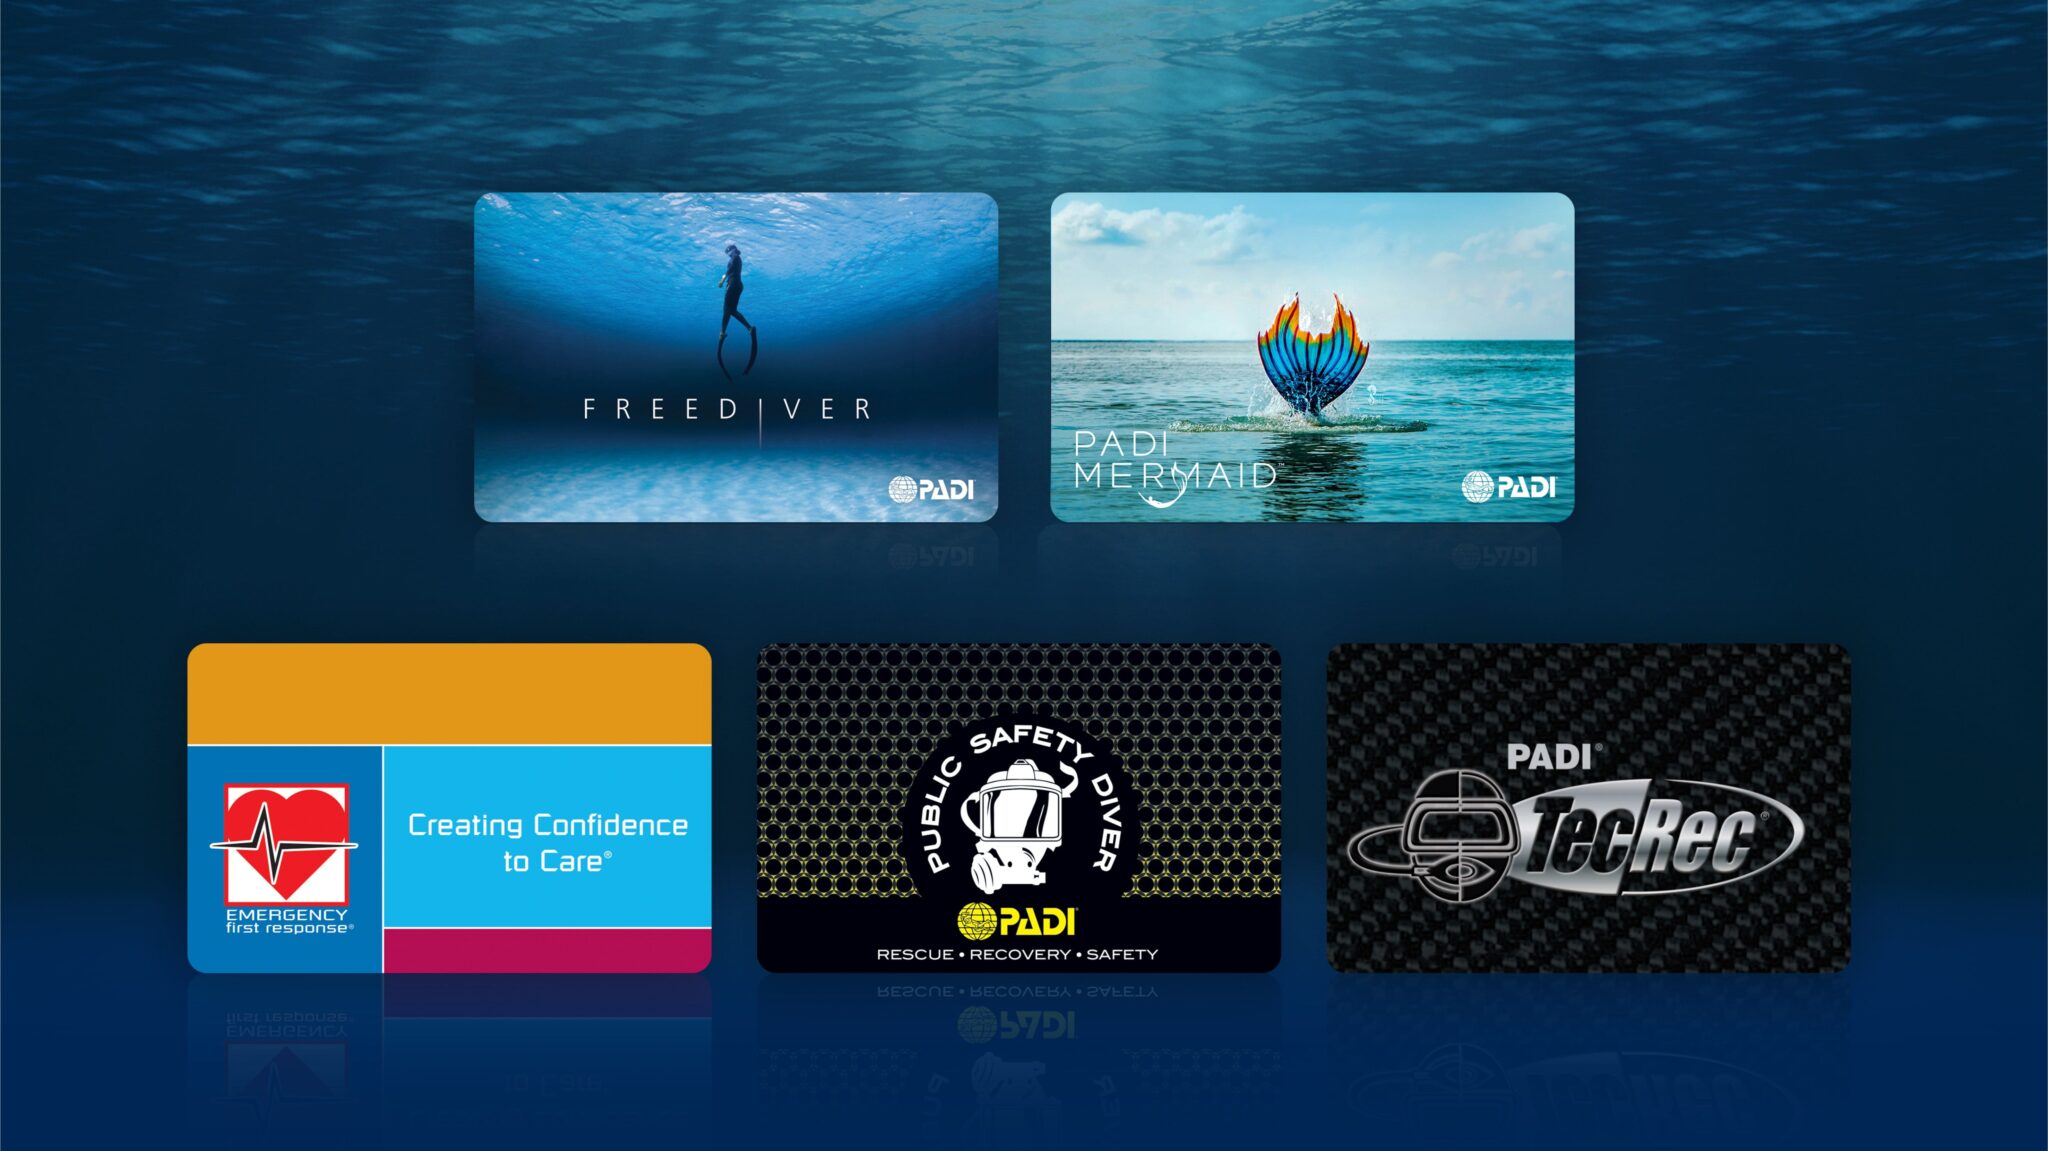 A product photo of five different PADI dive certification card designs for courses including Freediver, Mermaid, and TecRec